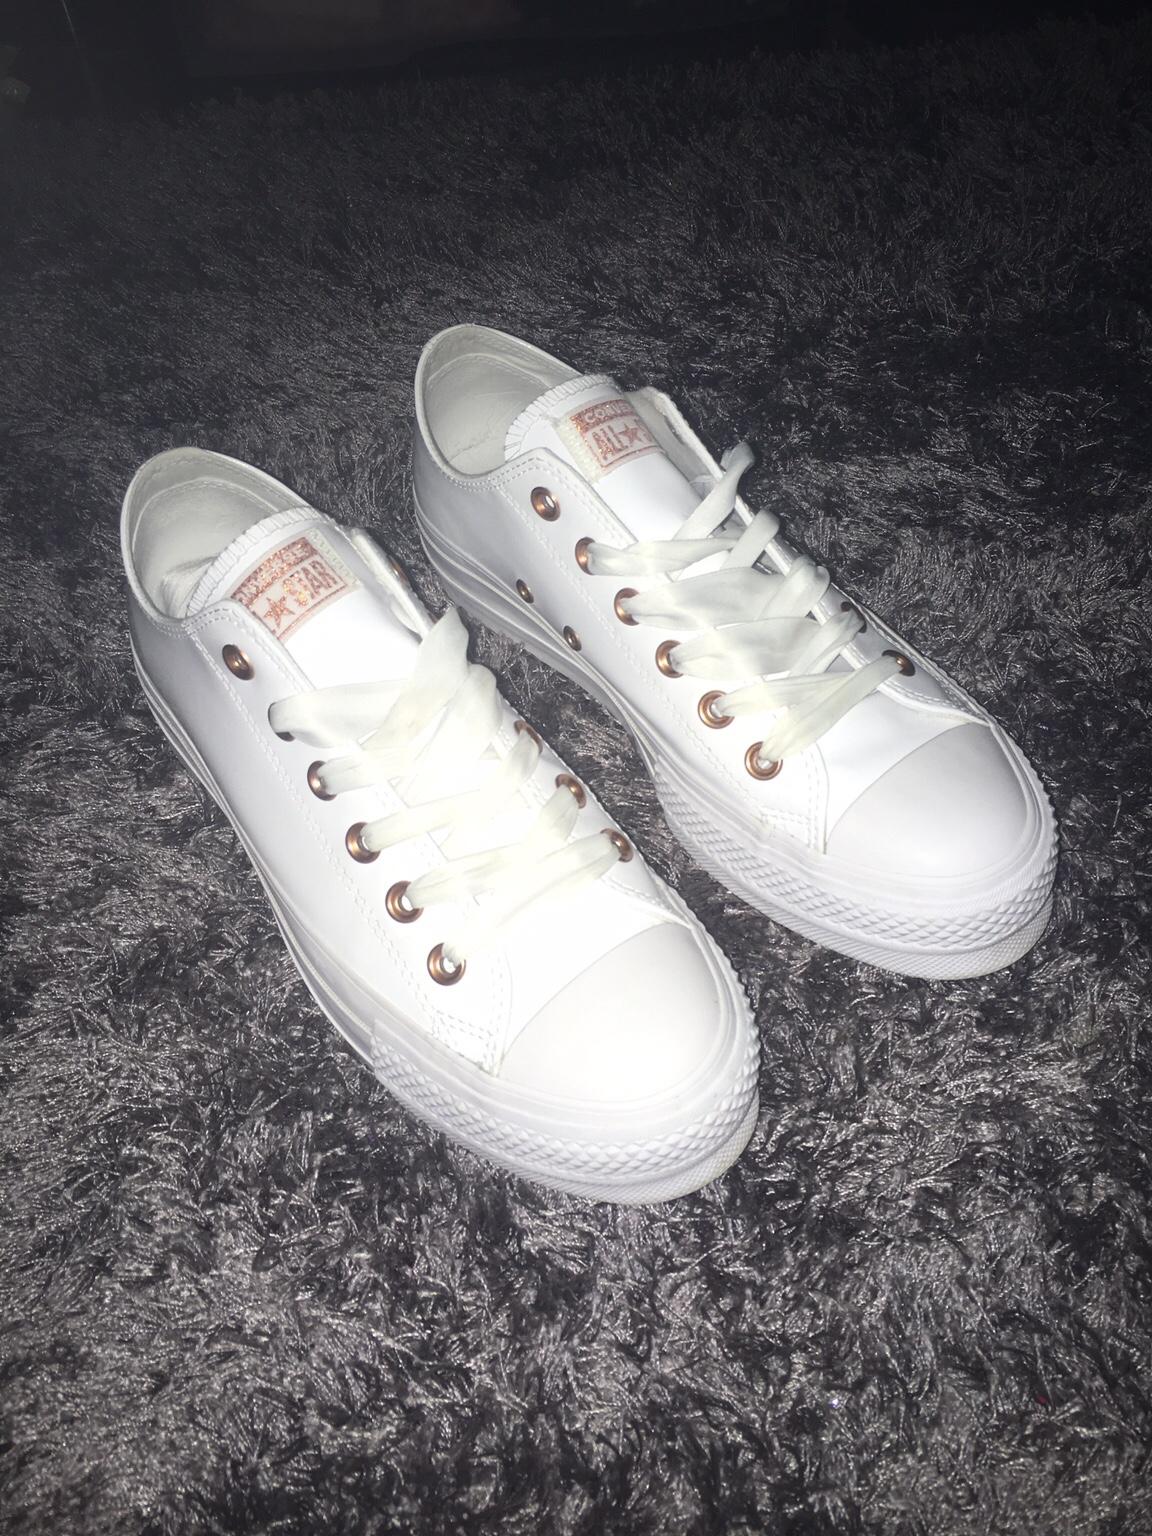 converse white leather rose gold